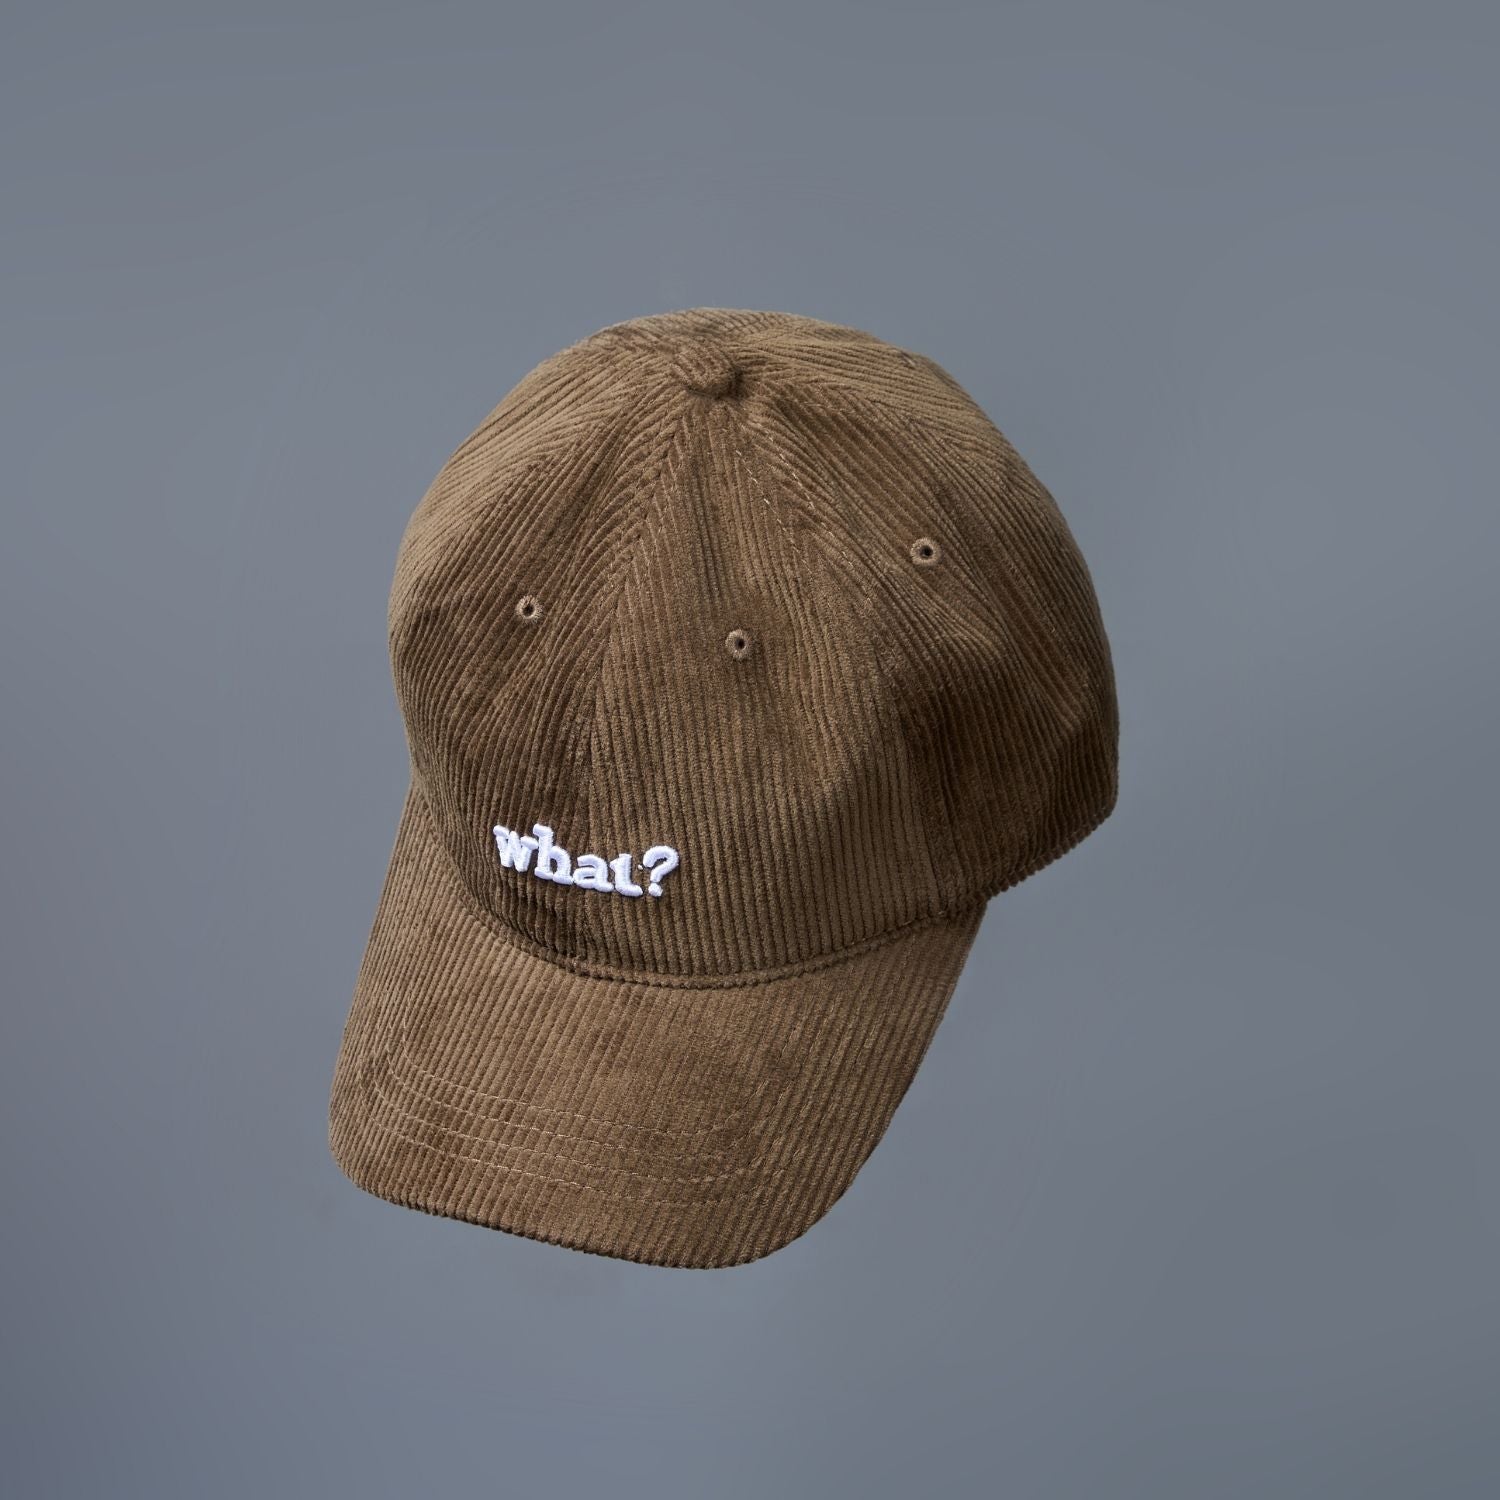 Brown colored cap for men with 'what' text written on it, design detail.